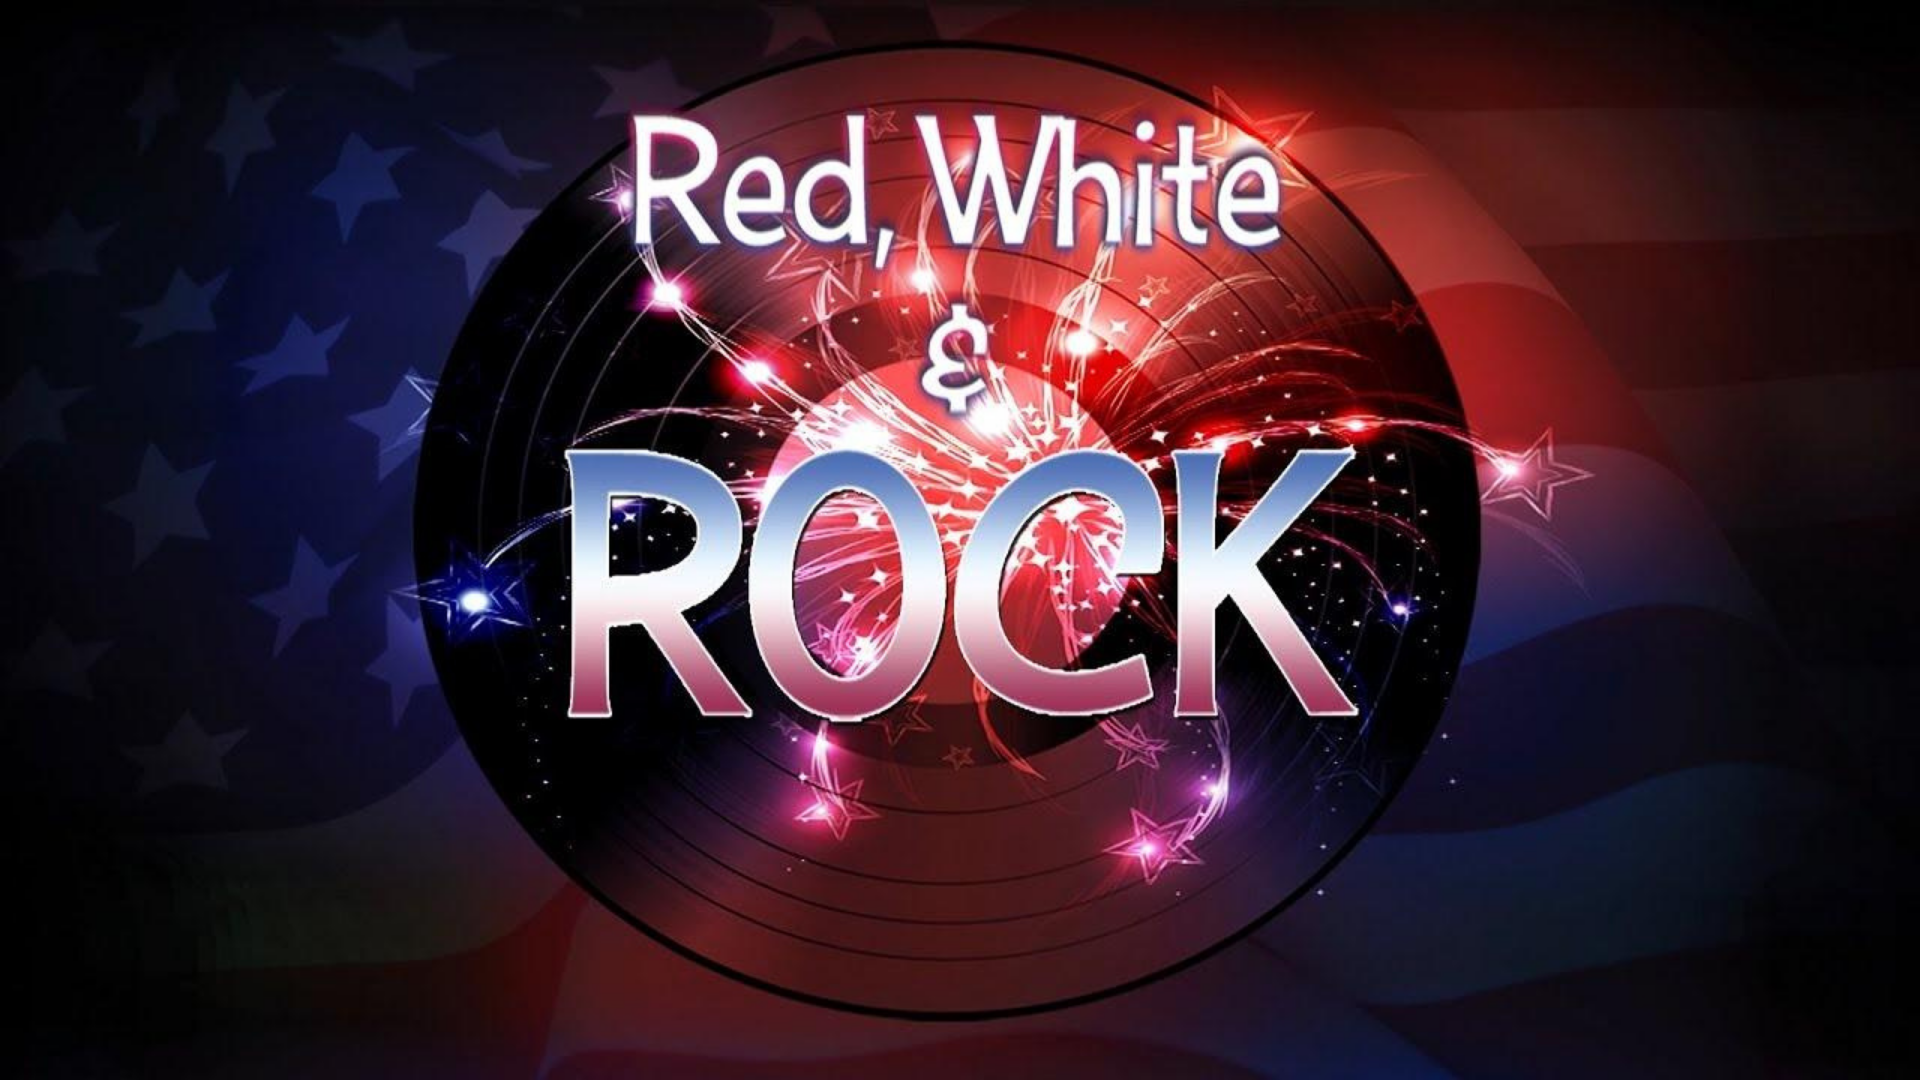 PLEDGE <br/>Red, White and Rock